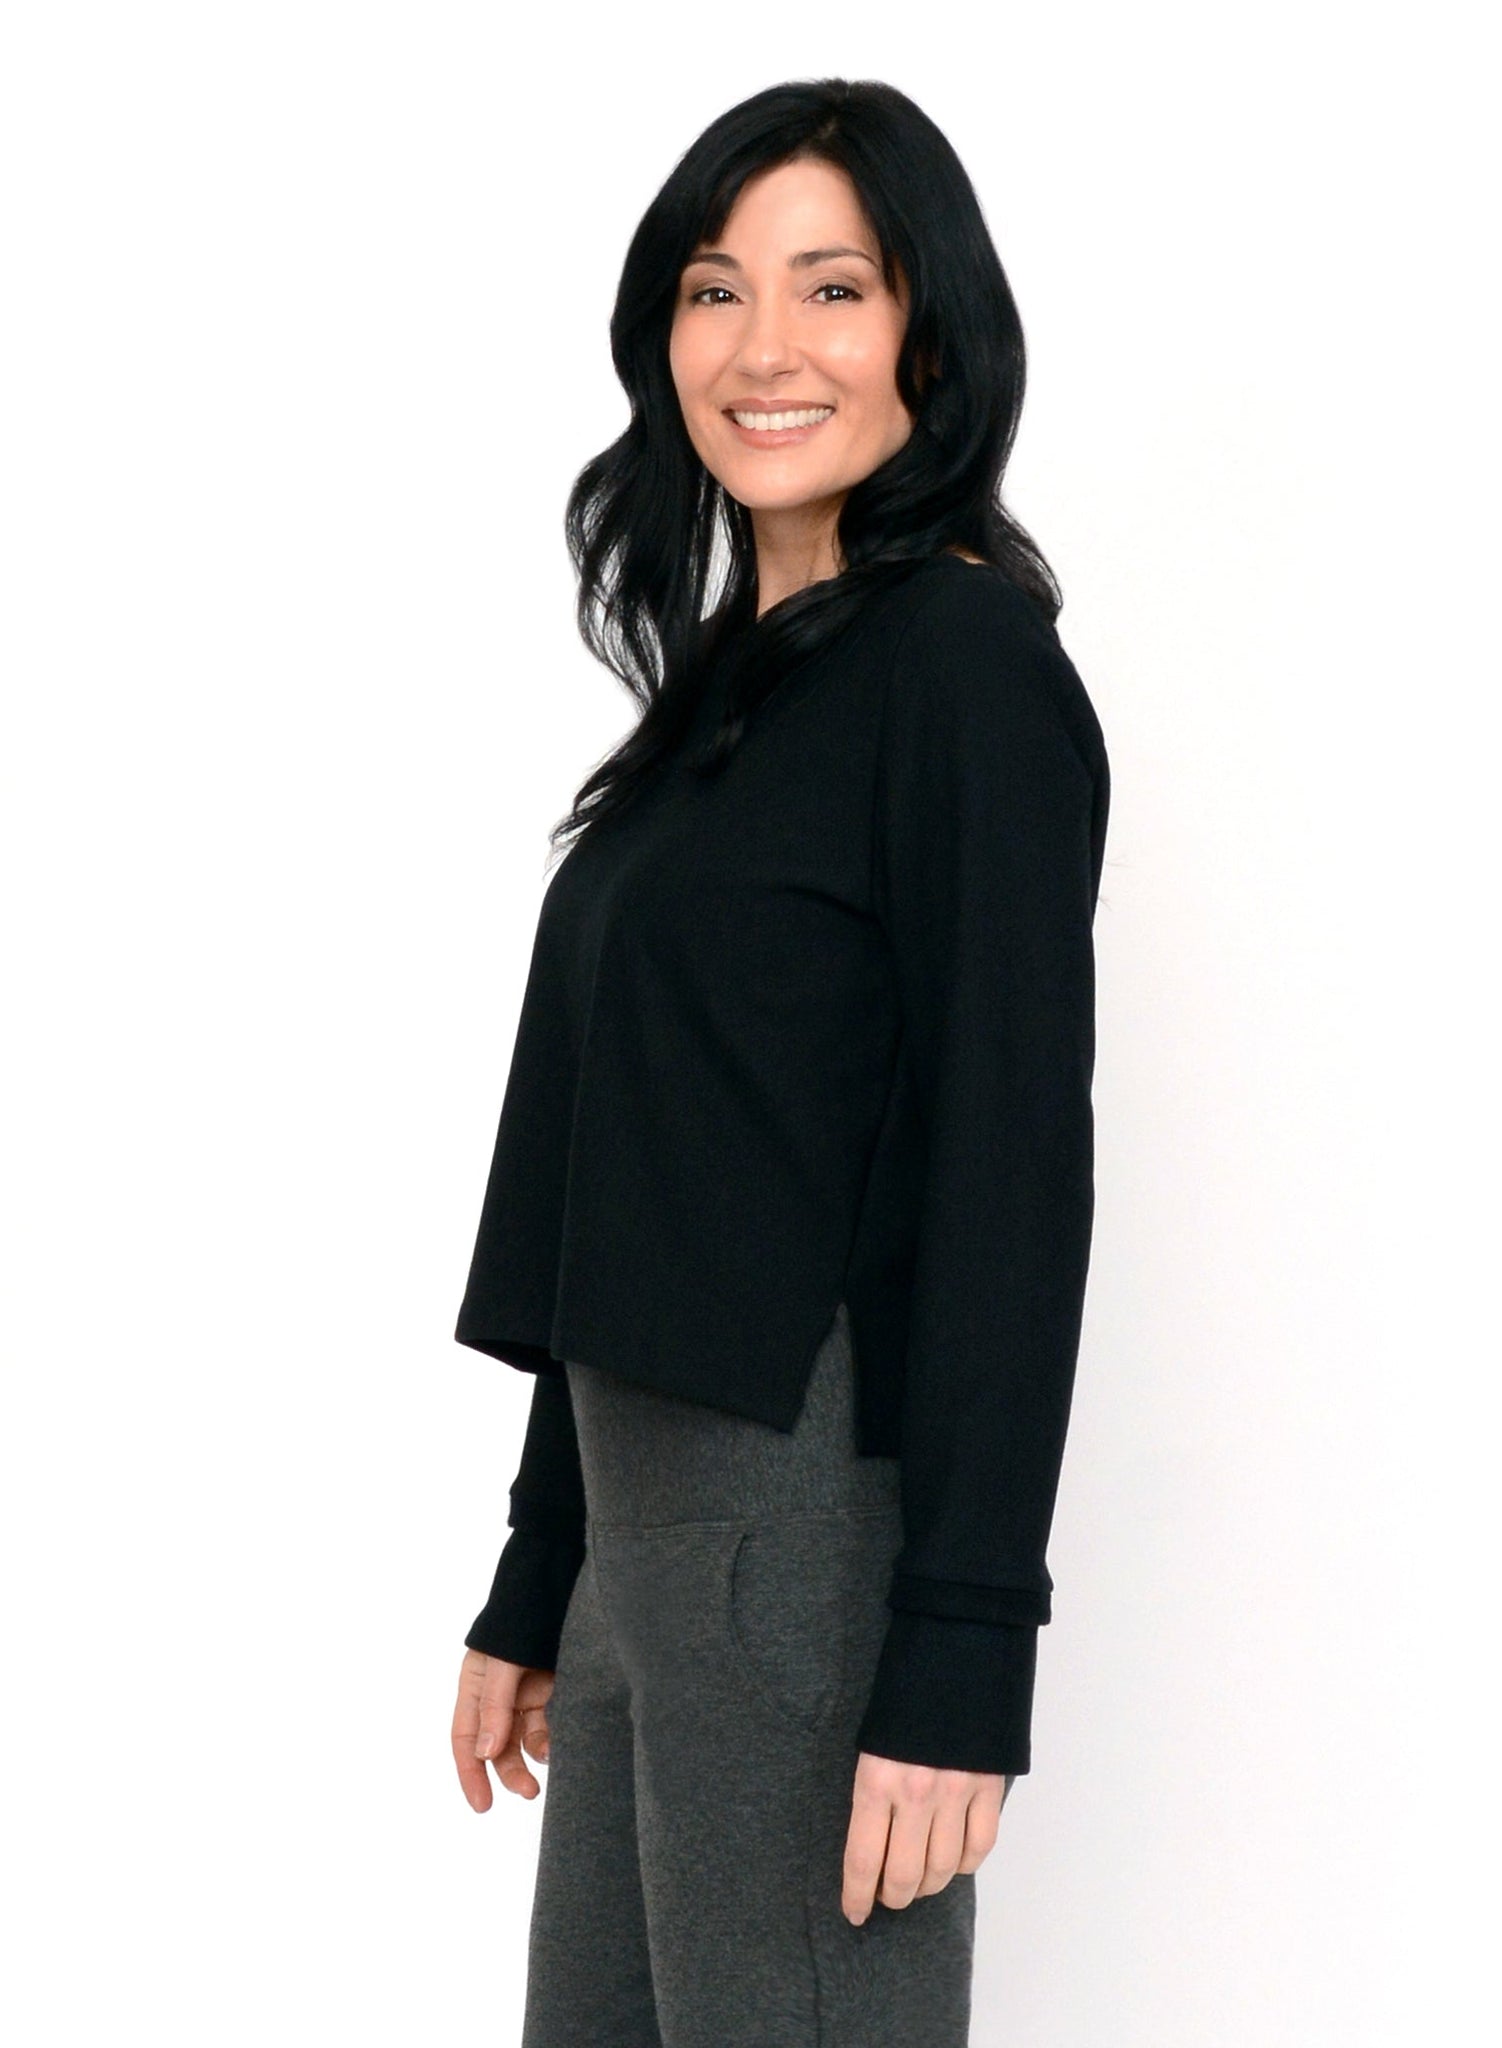 Black Bamboo fleece cropped sweater with pleat at shoulder seam and reverse fabric detail on cuff. Styled with charcoal grey pants. 